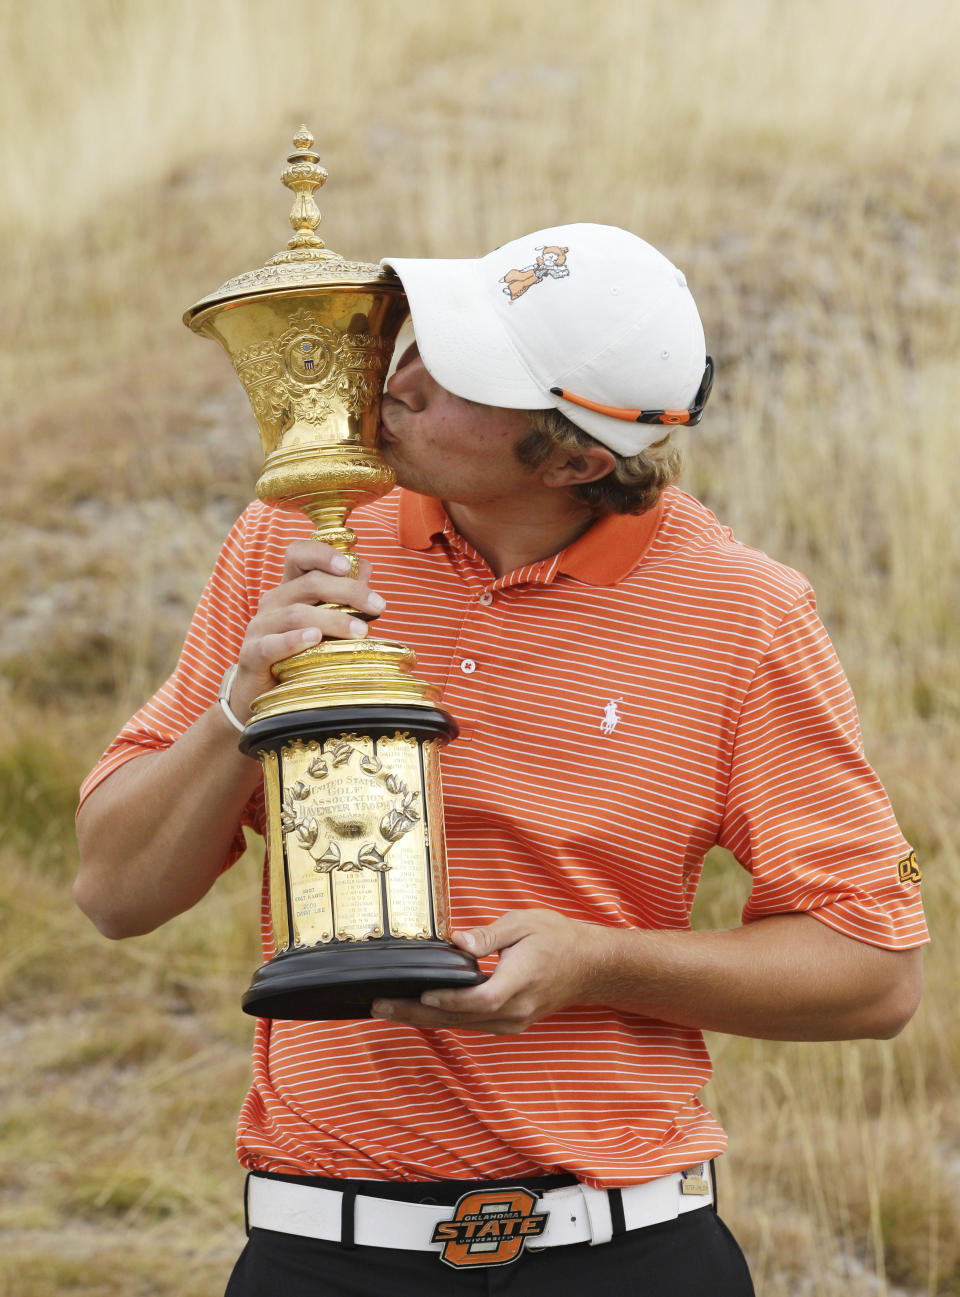 FILE - Peter Uihlein kisses the Havemeyer Trophy after Uihlein beat David Chung 4 and 2 in the final round of the U.S. Amateur golf tournament, Sunday, Aug. 28, 2010, at Chambers Bay in University Place, Wash. Uihlein has become the face of how quickly Saudi-funded LIV Golf can change fortunes. (AP Photo/Ted S. Warren, File)